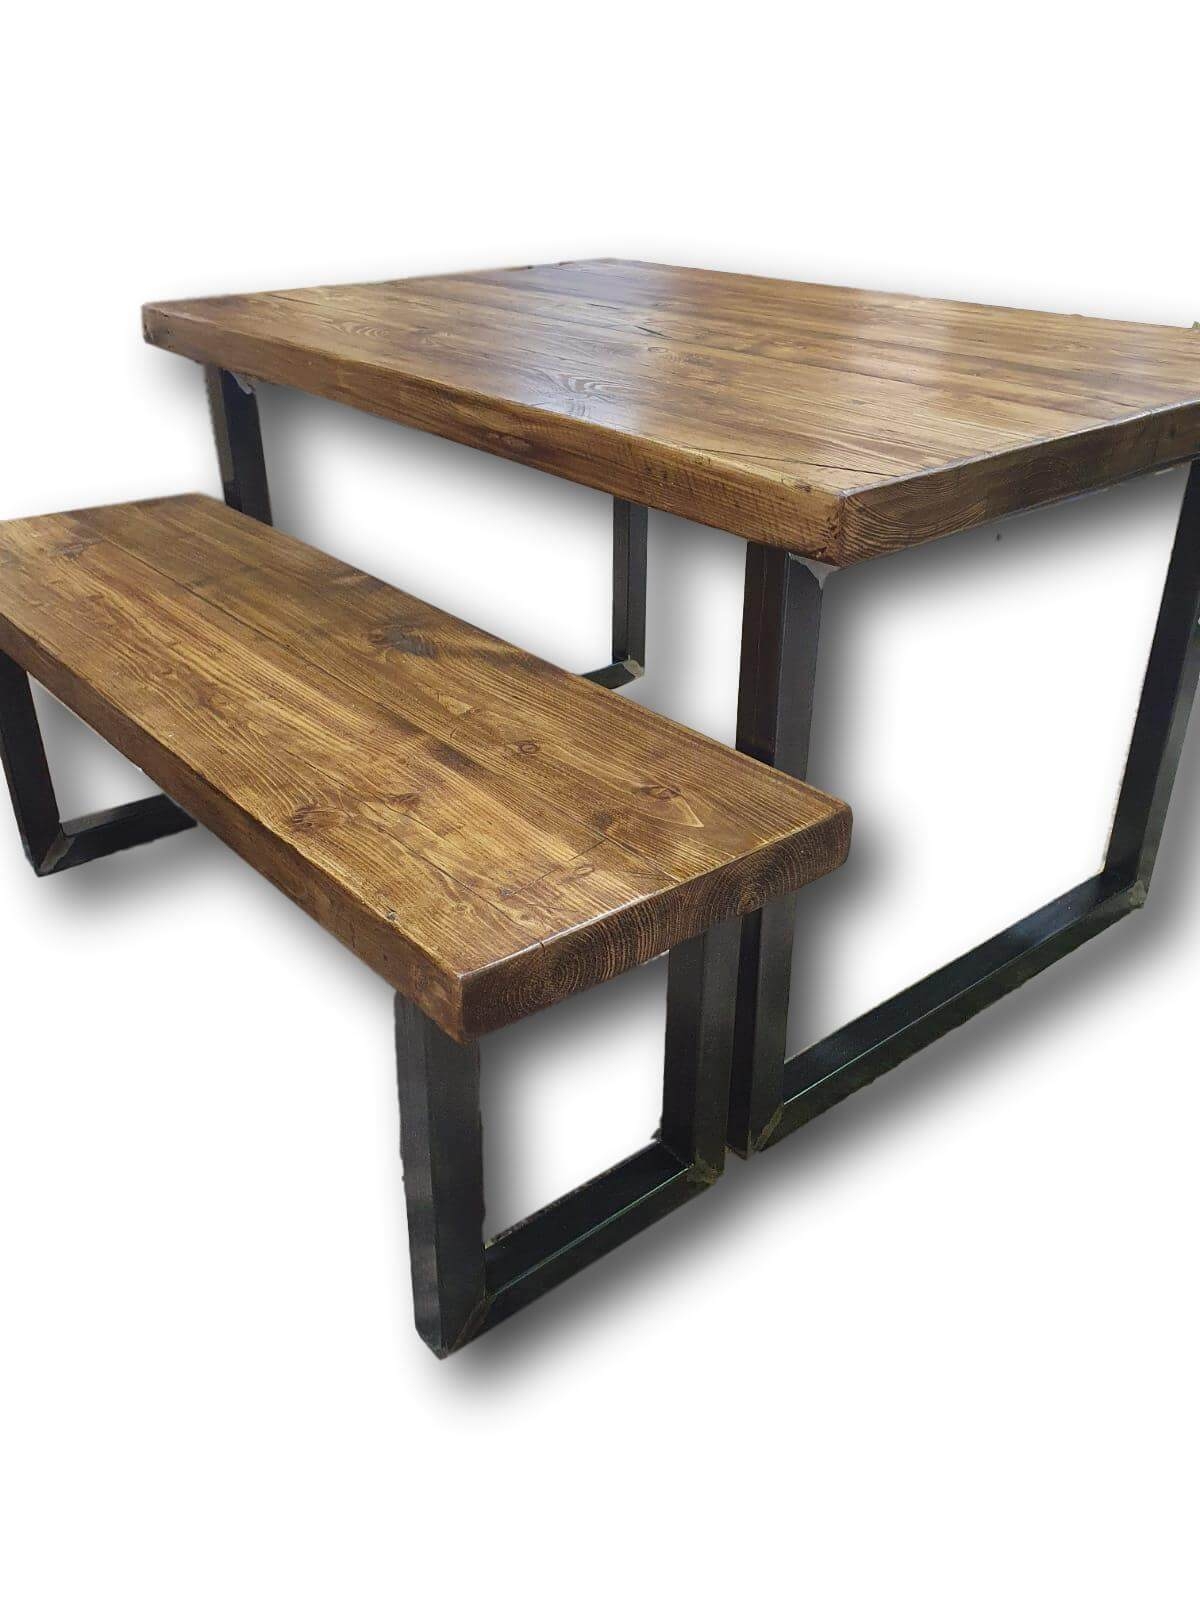 The Reclaimed Rustic Weathered Table Oil Finish – Design Your Own Dining Table 230cm x 120cm1 bench (same length as table) – Acumen Collection